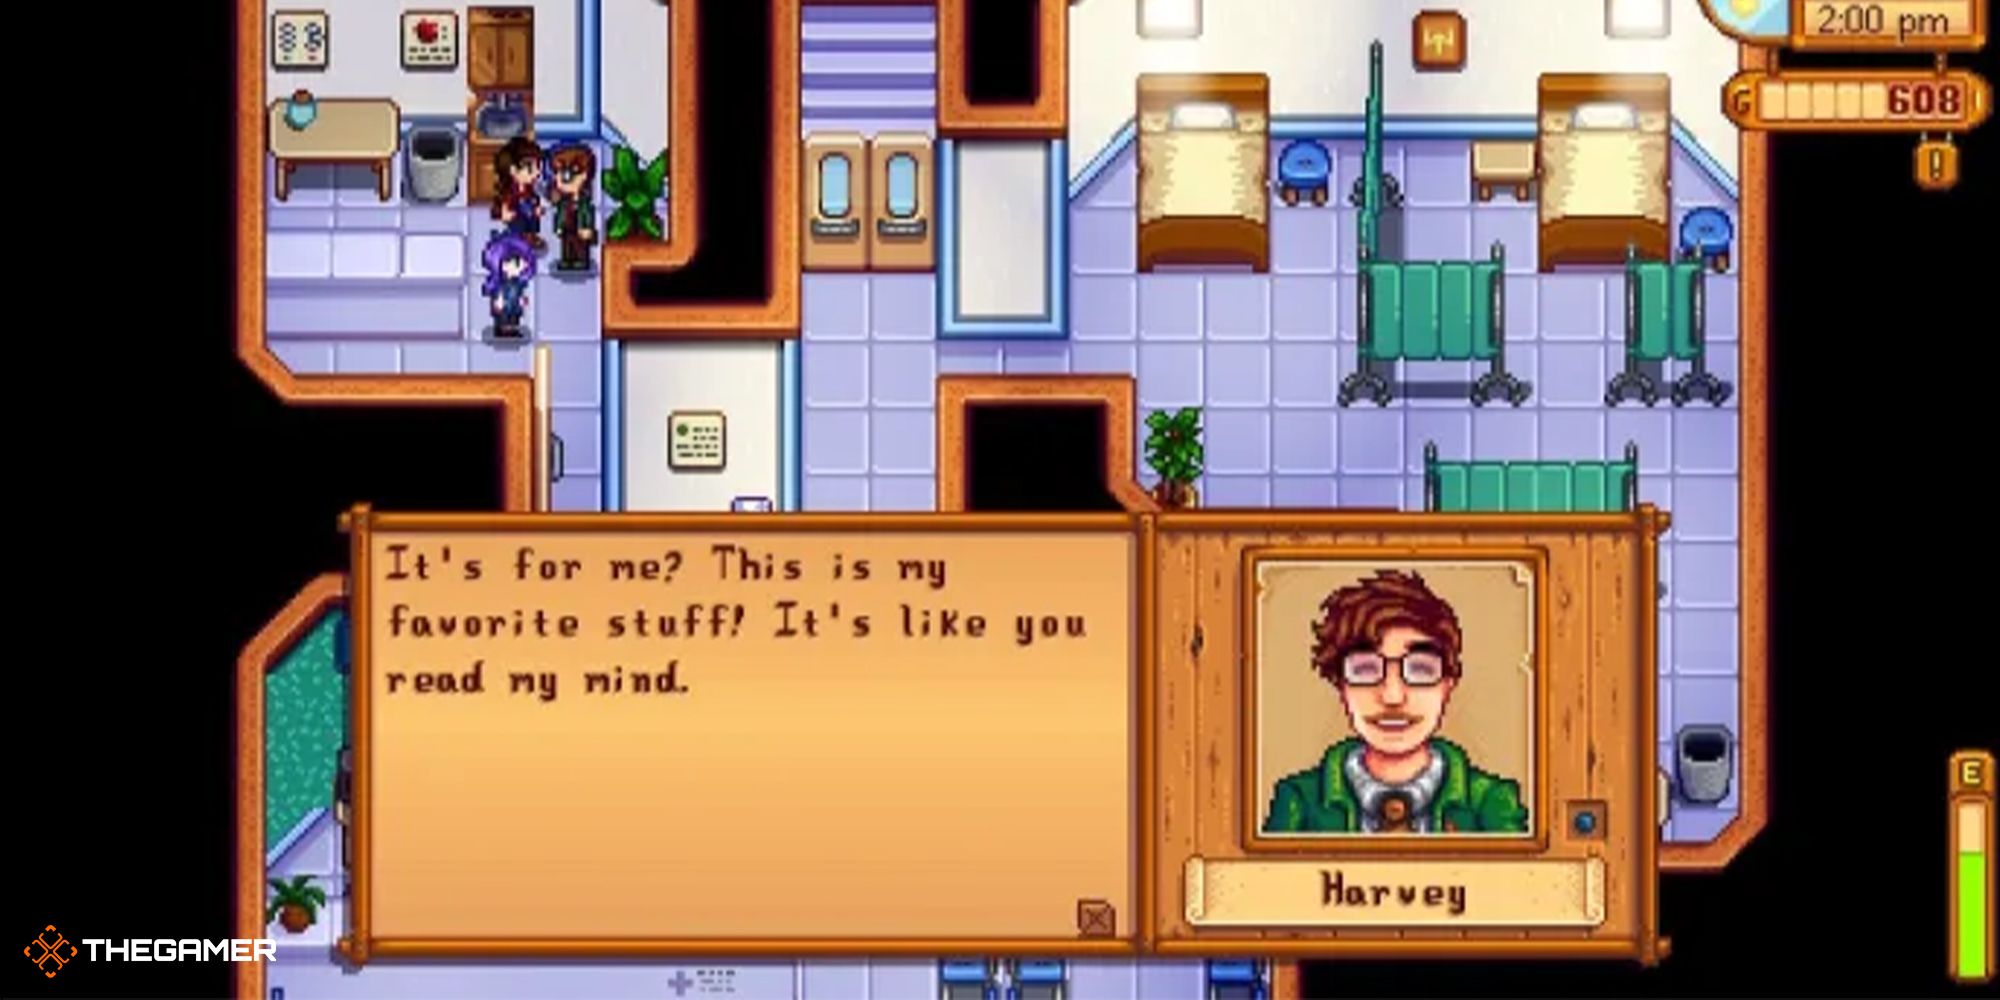 Stardew Valley: A Complete Guide to Marrying Harvey